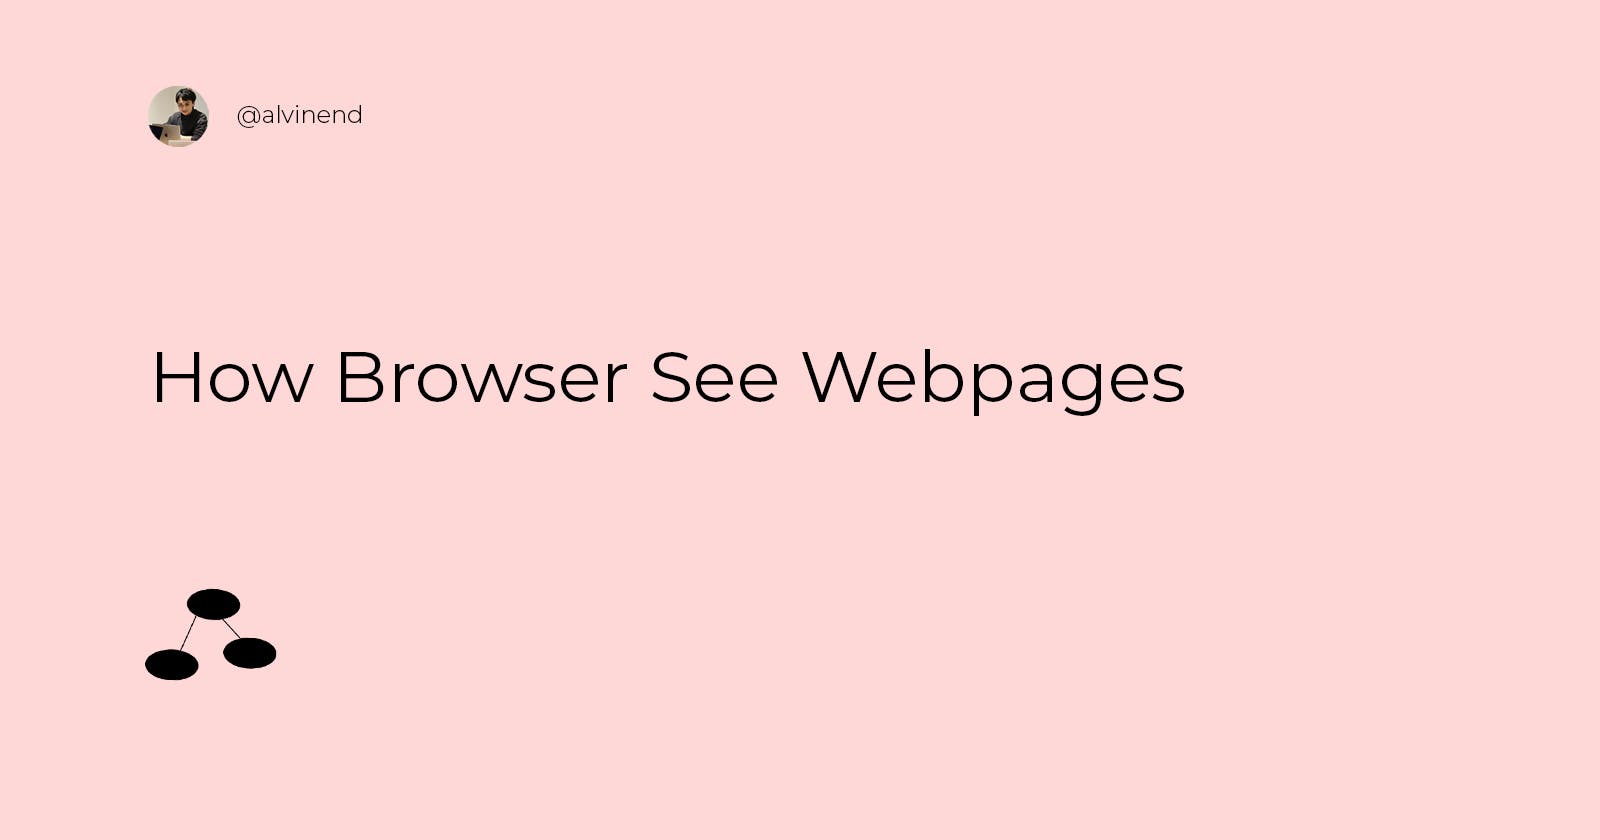 How Browser See Webpages